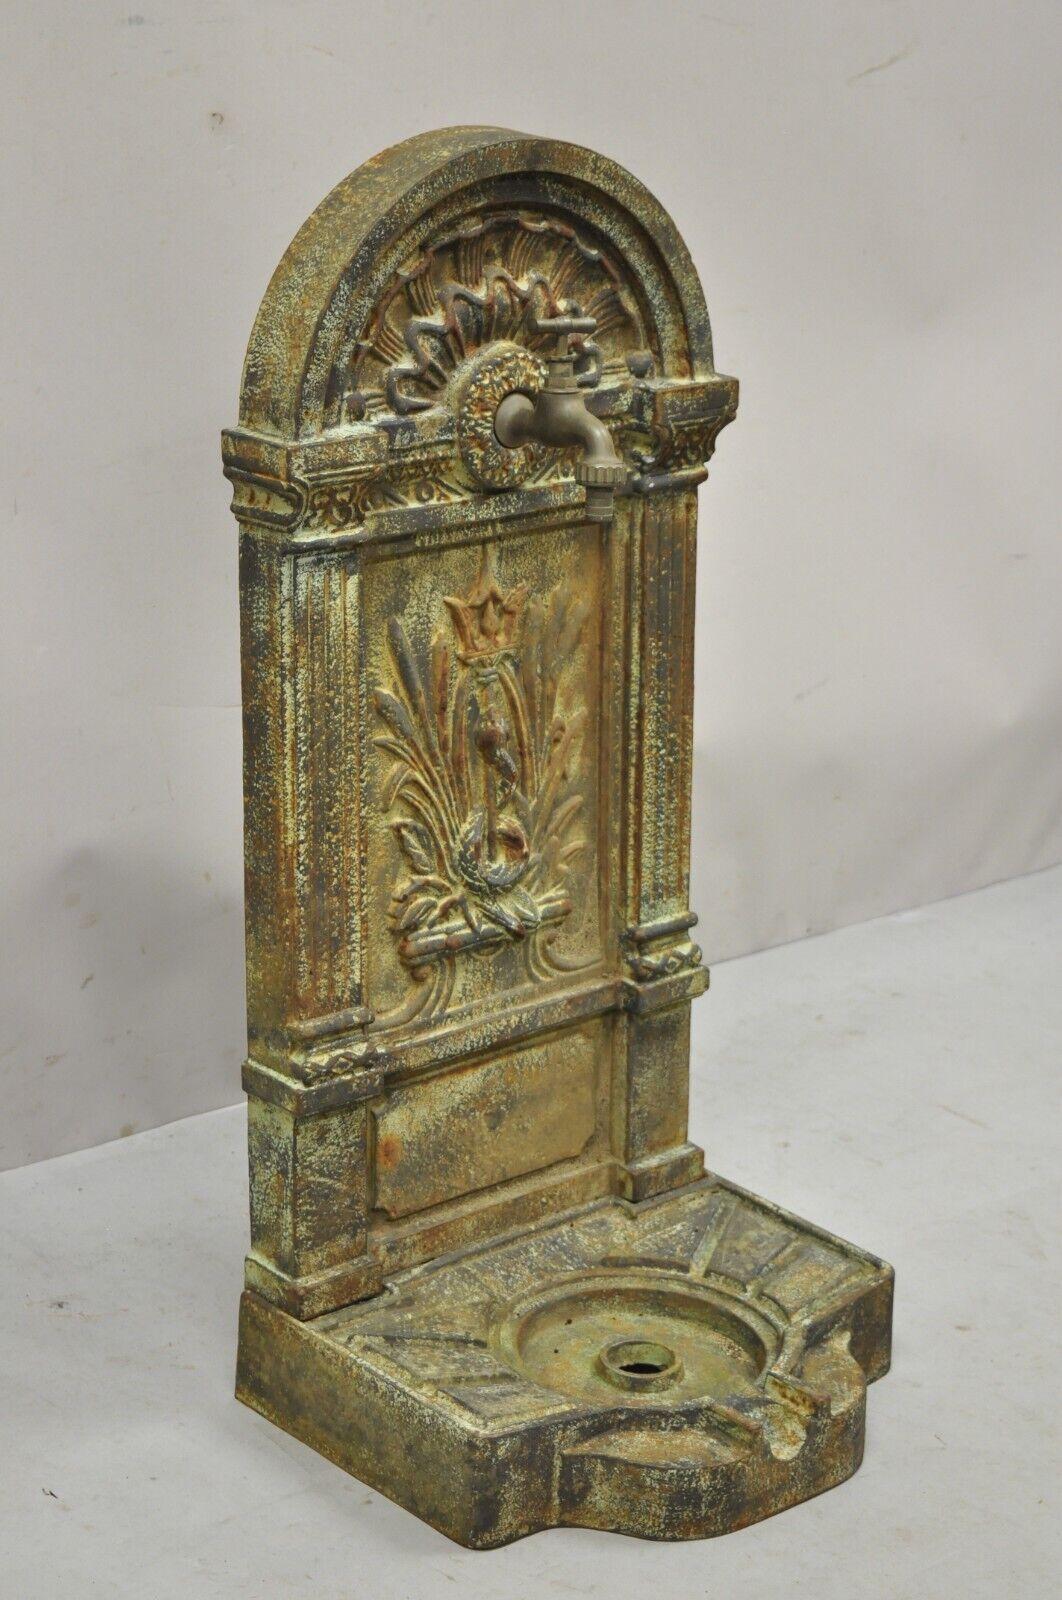 Cast iron French neoclassical style serpent and trident outdoor garden wall fountain. Item features *currently 3 available. Patina and finish will vary. Price is per piece*. heavy cast iron construction, serpent and trident design, desirable